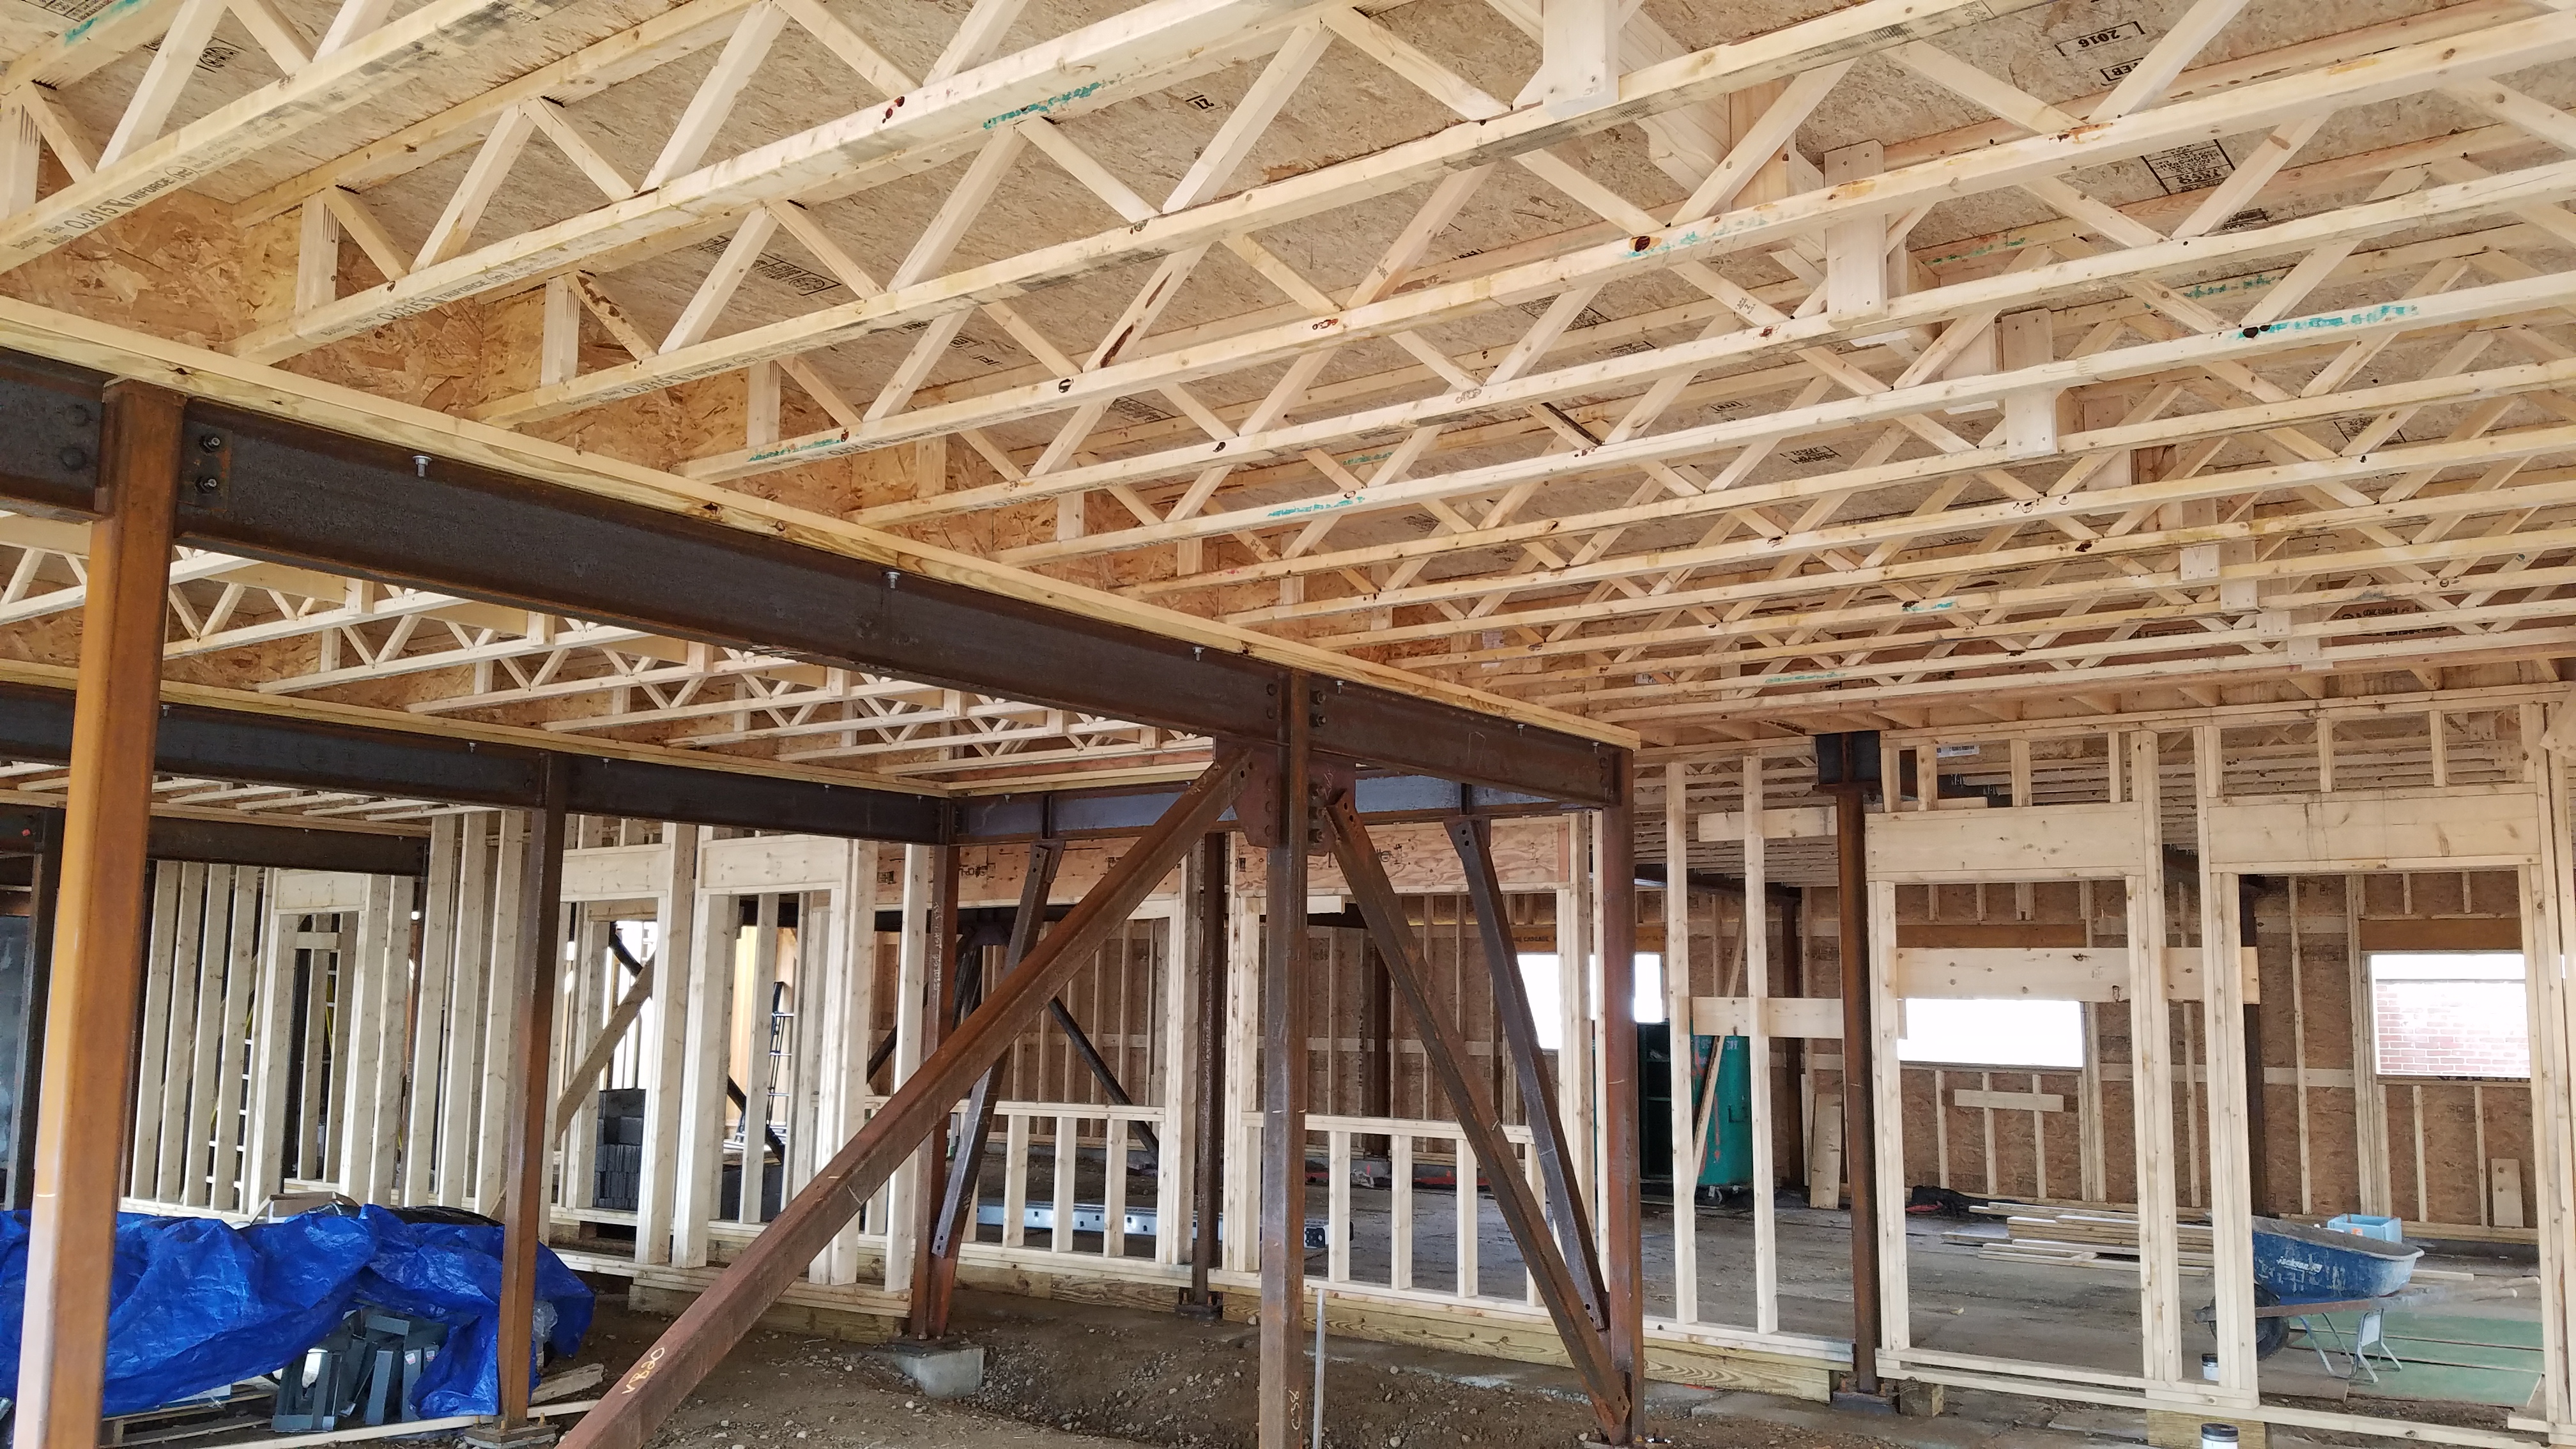 Triforce19.2 and 16 on center replace plated trusses